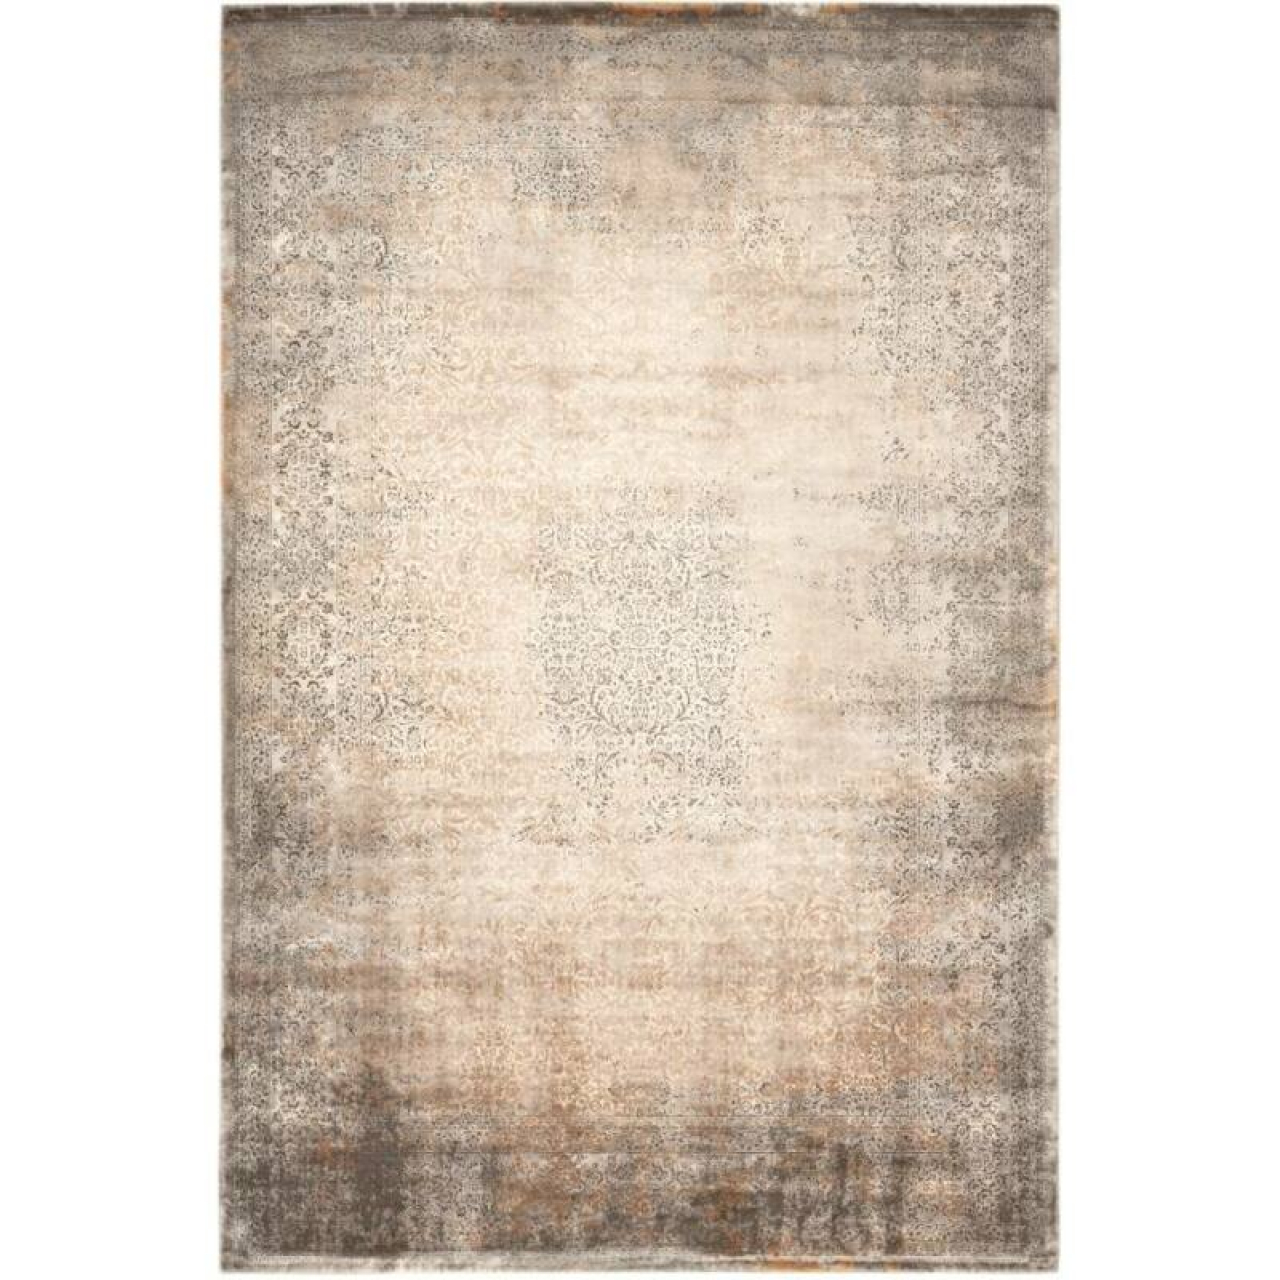 Obsession Haute Couture Jewel 954 Taupe szőnyeg-140x200